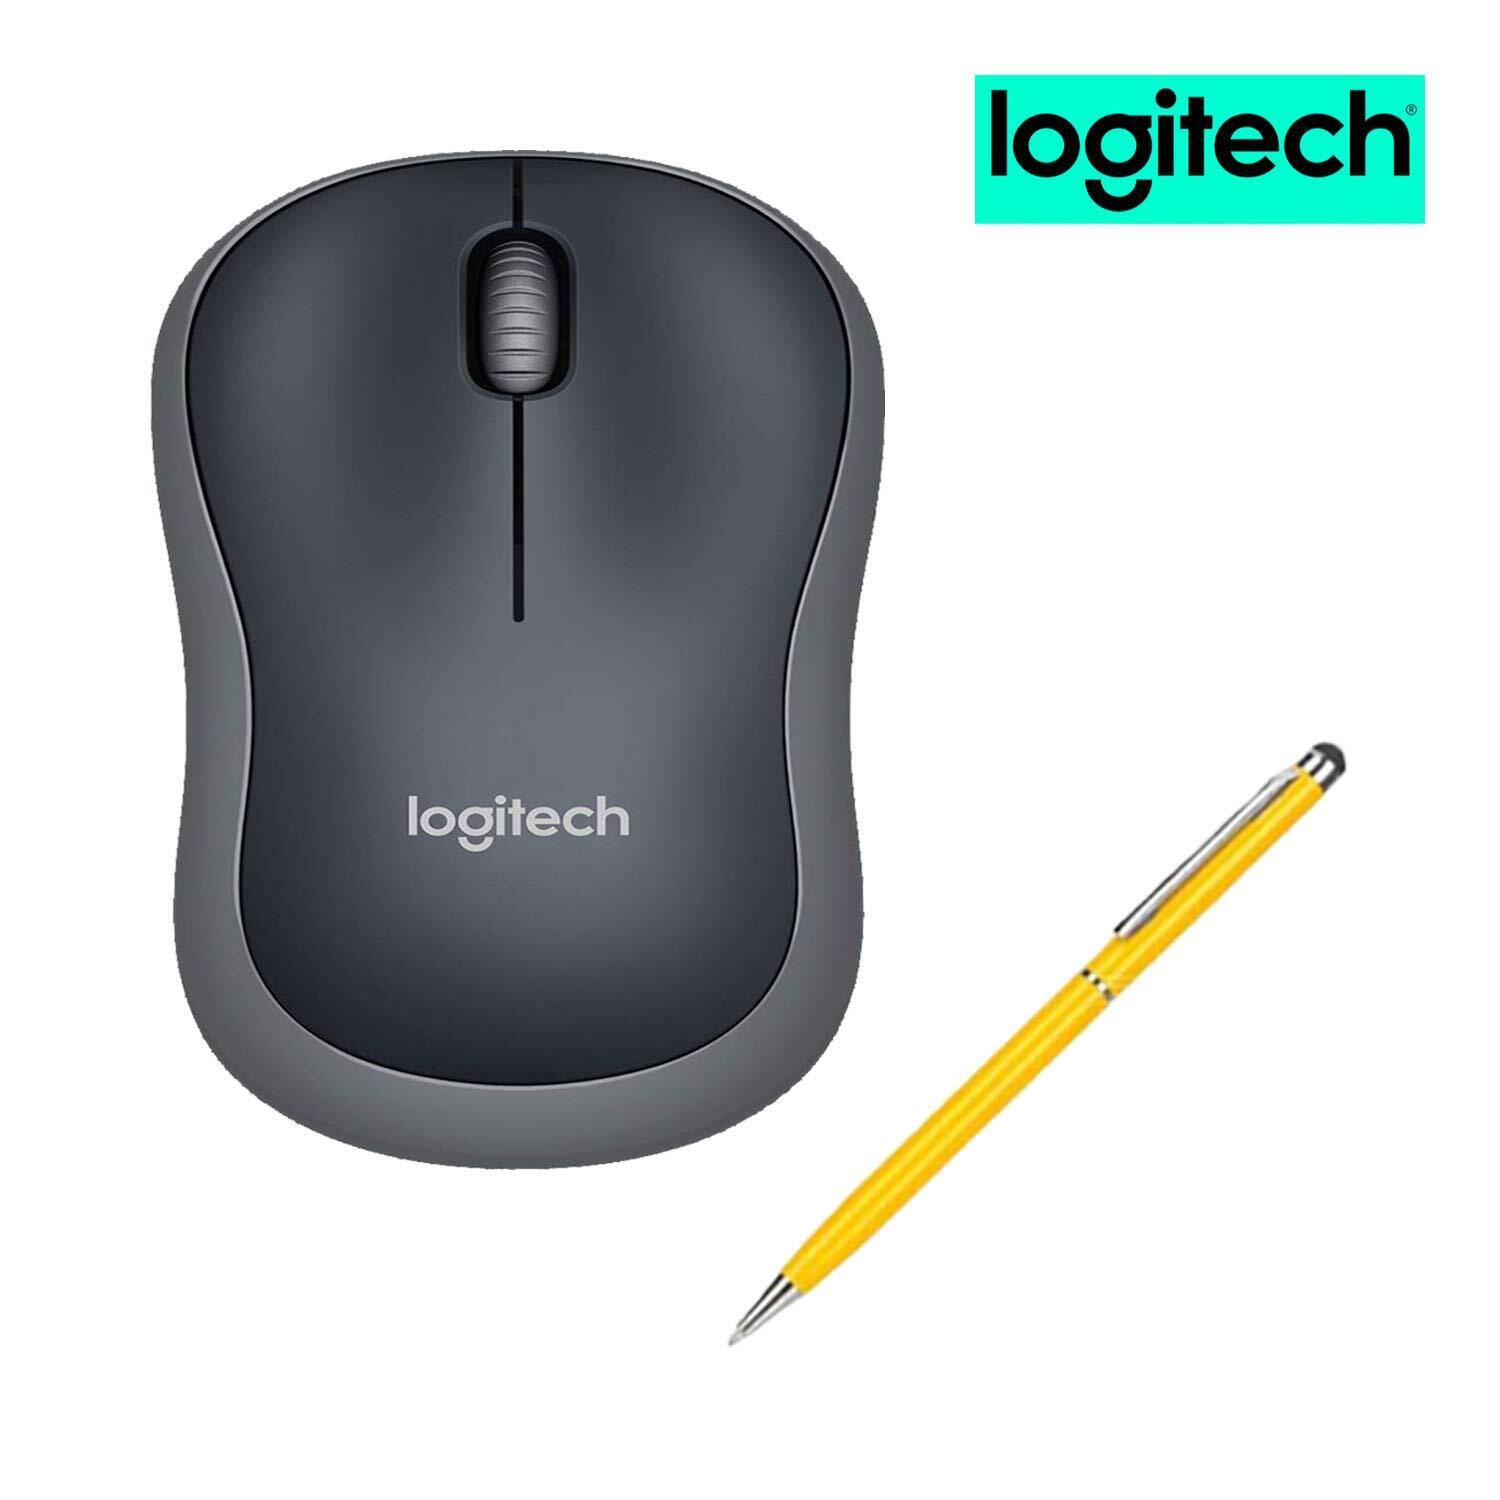 Logitech M185 Wireless Mouse for Computers Laptops Fast Scrolling Bundle